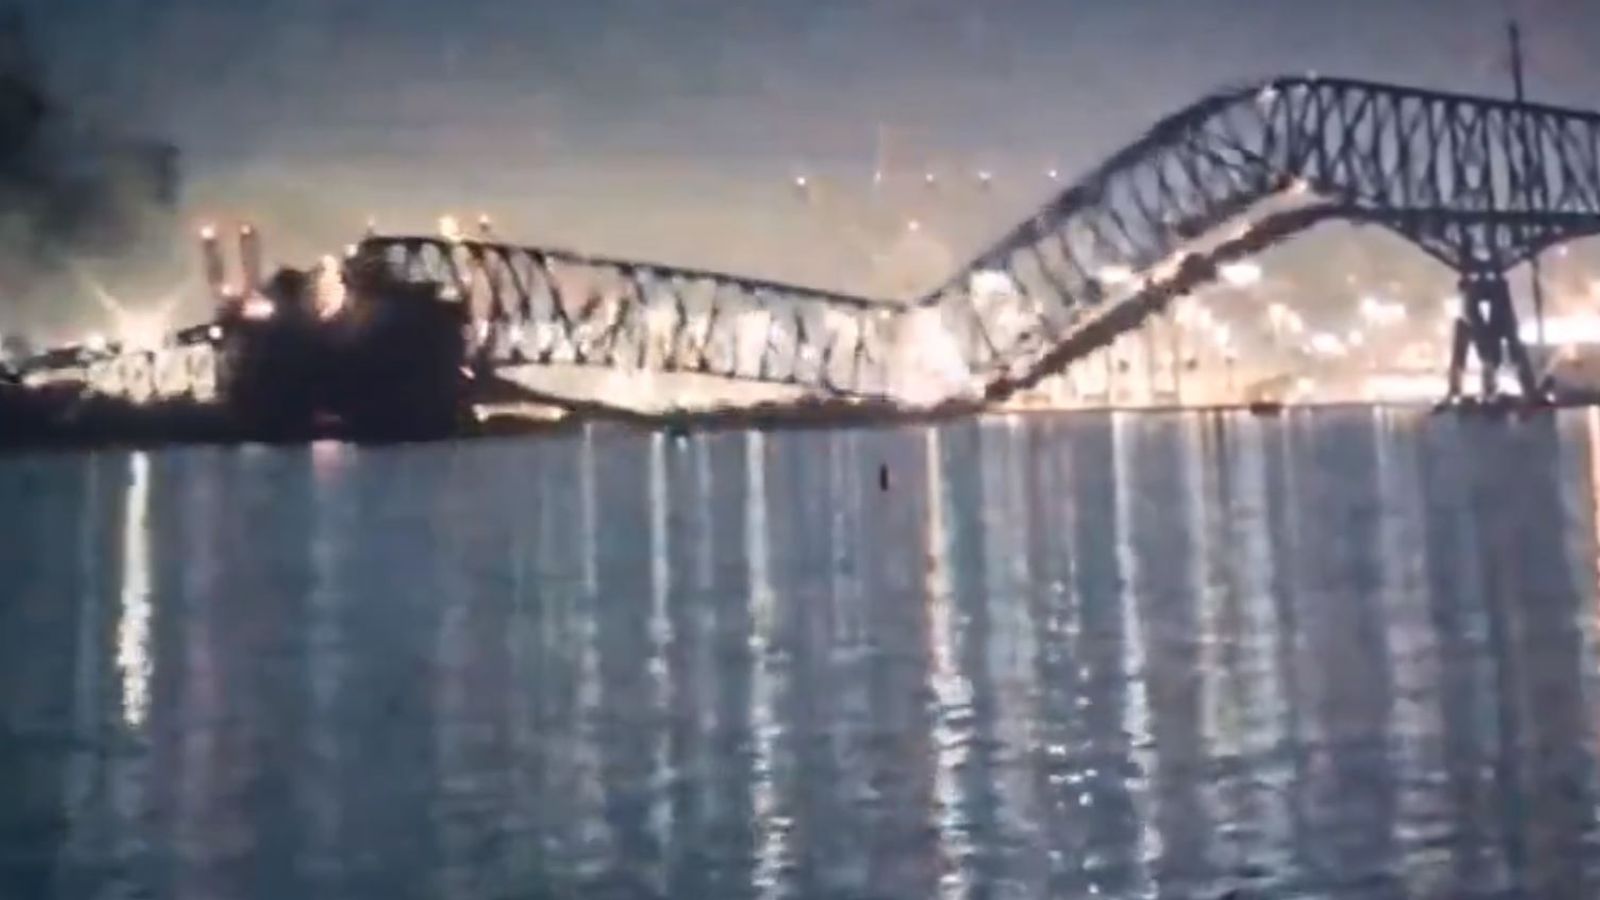 The Francis Scott Key Bridge in Baltimore has collapsed after a ship collision. Pic: Raws Alerts